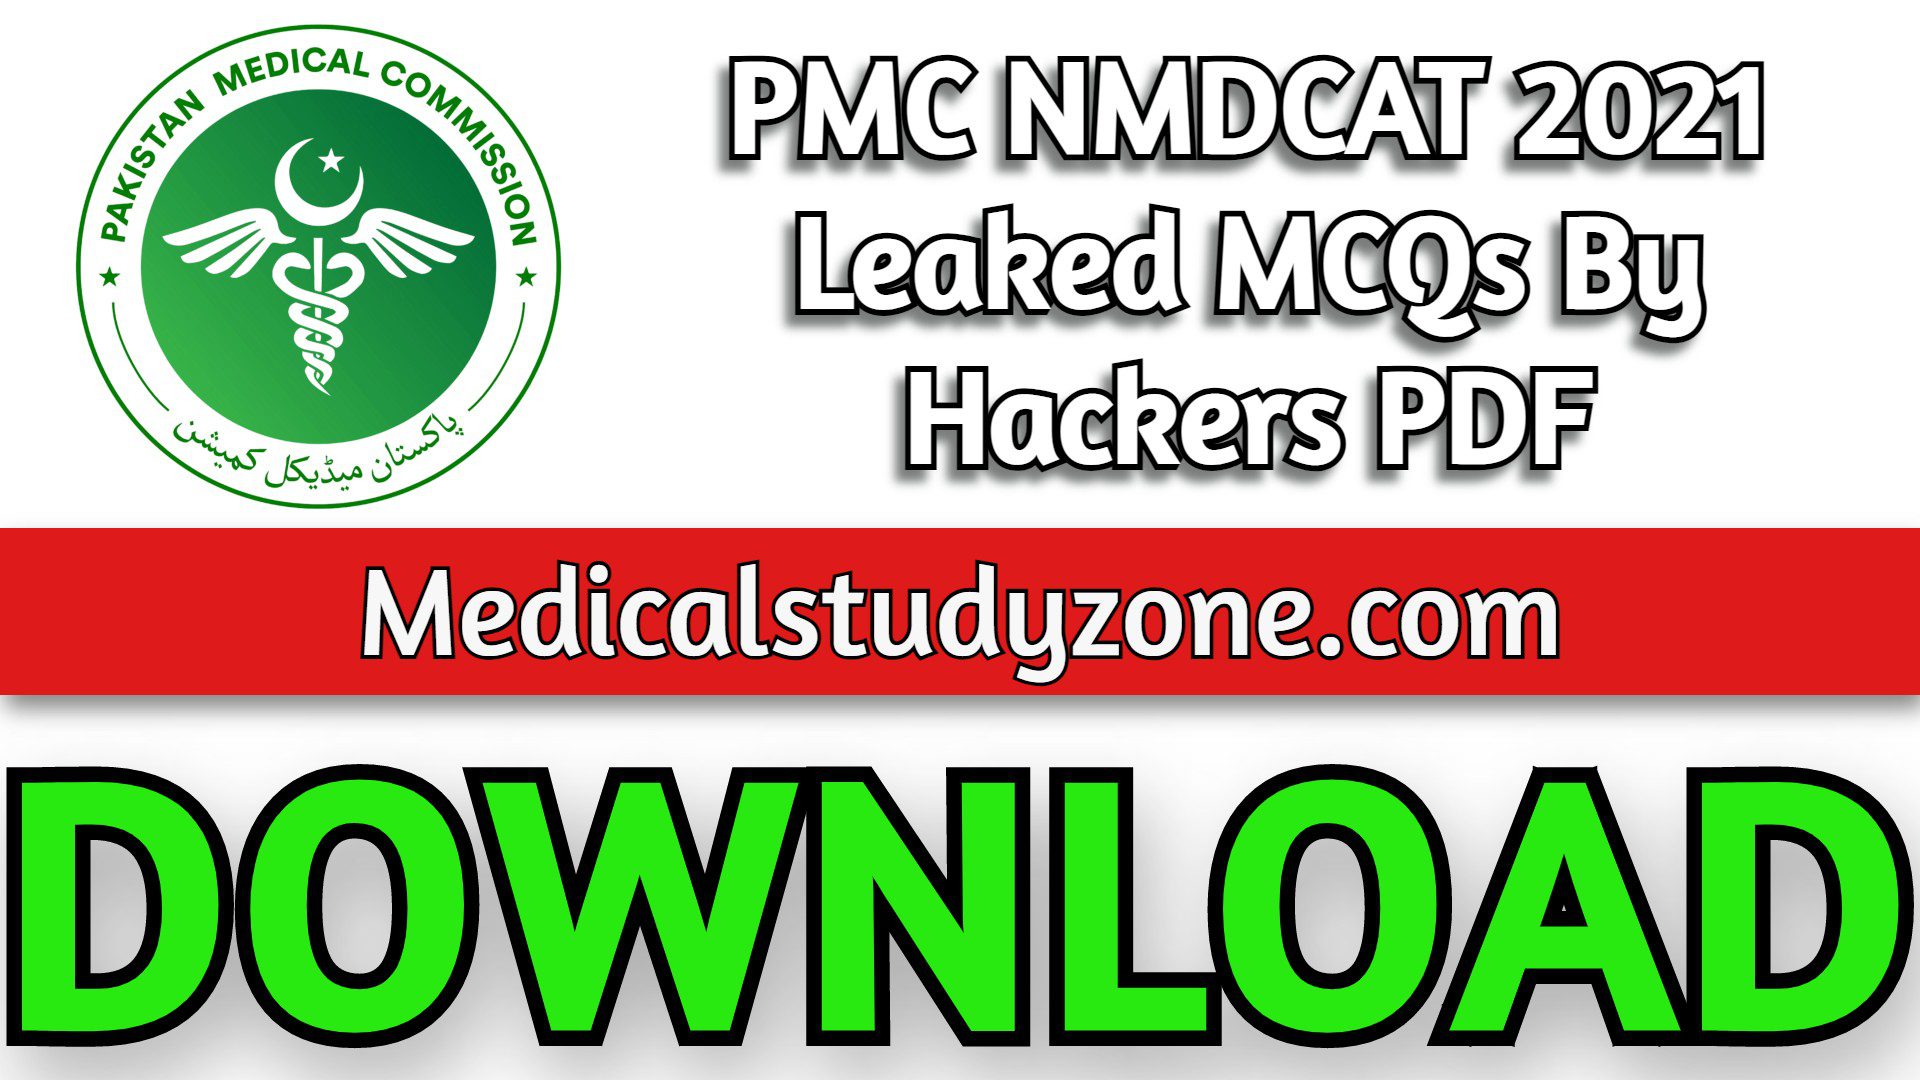 PMC NMDCAT 2021 Leaked MCQs By Hackers PDF Free Download